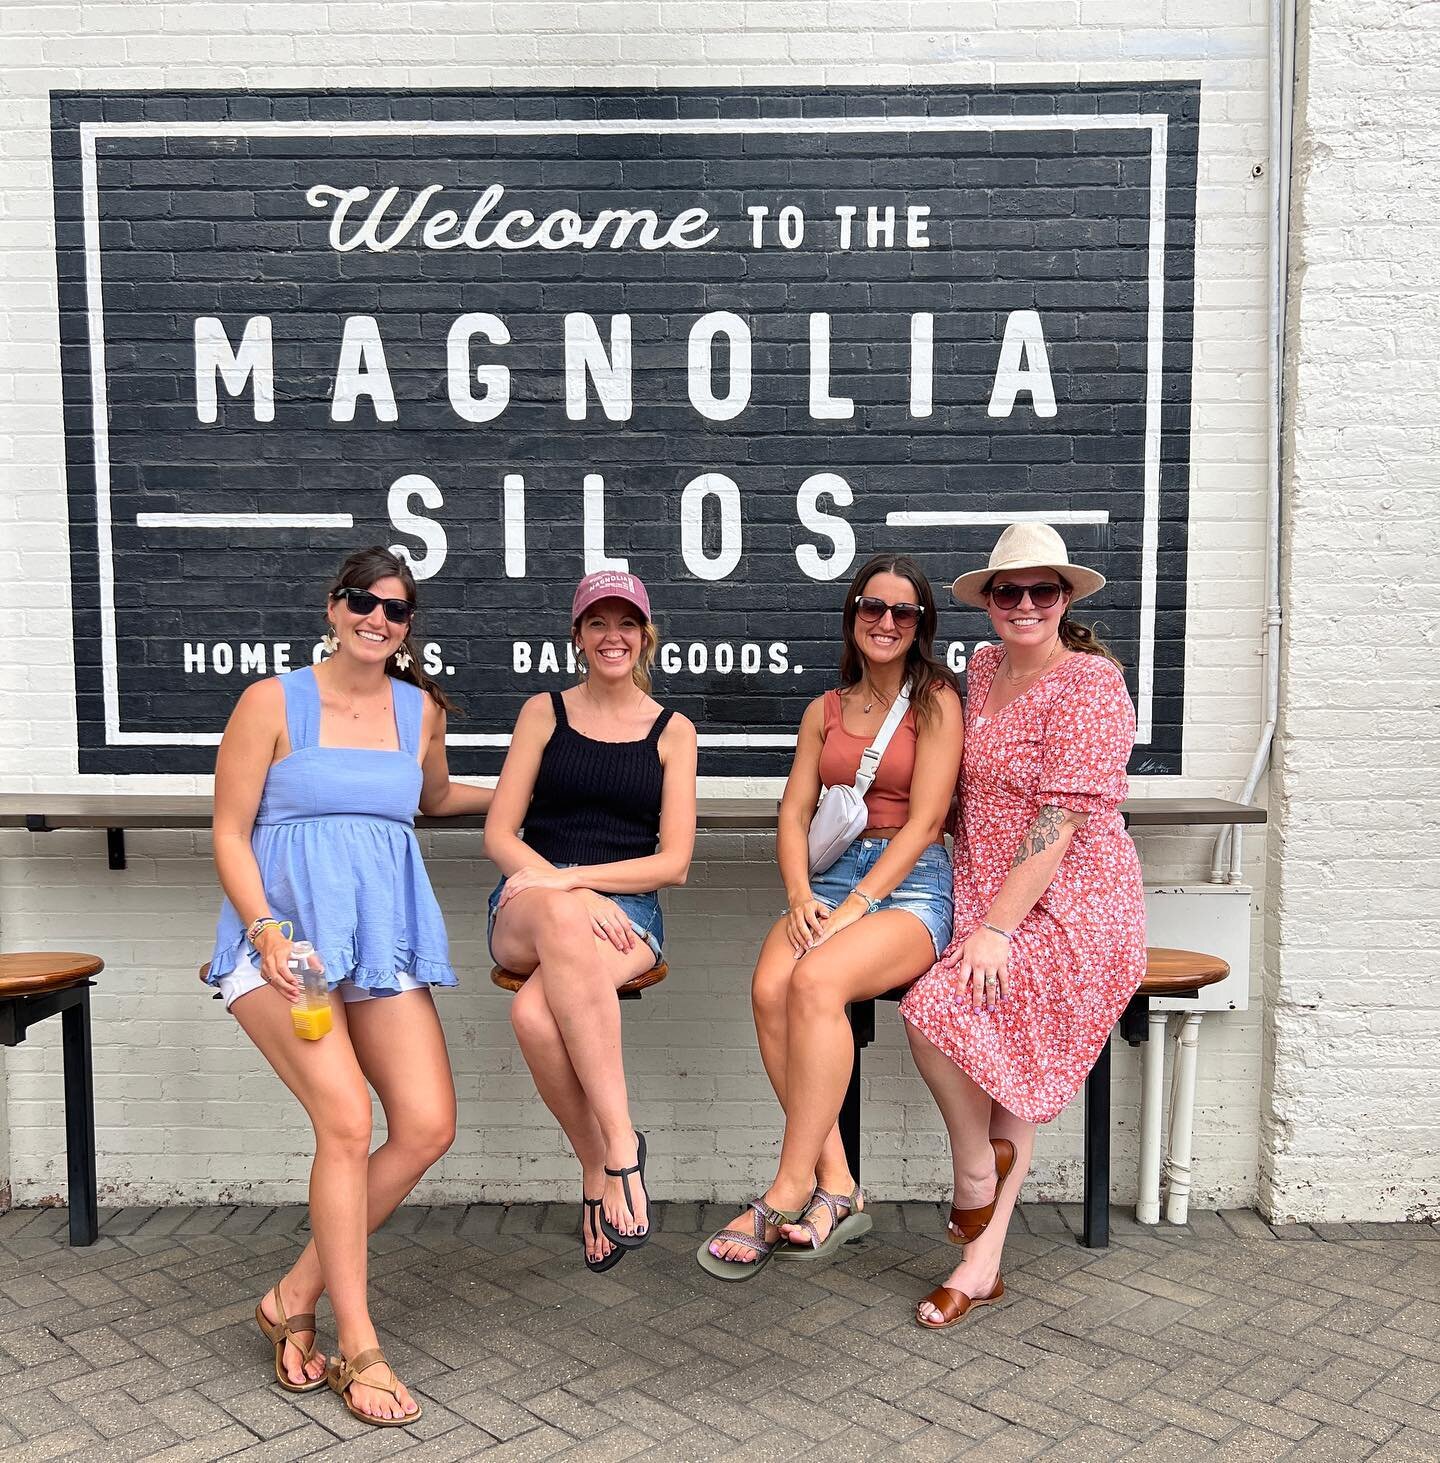 Magnolia trip ✅
Awesome friend ✅
So many laughs ✅